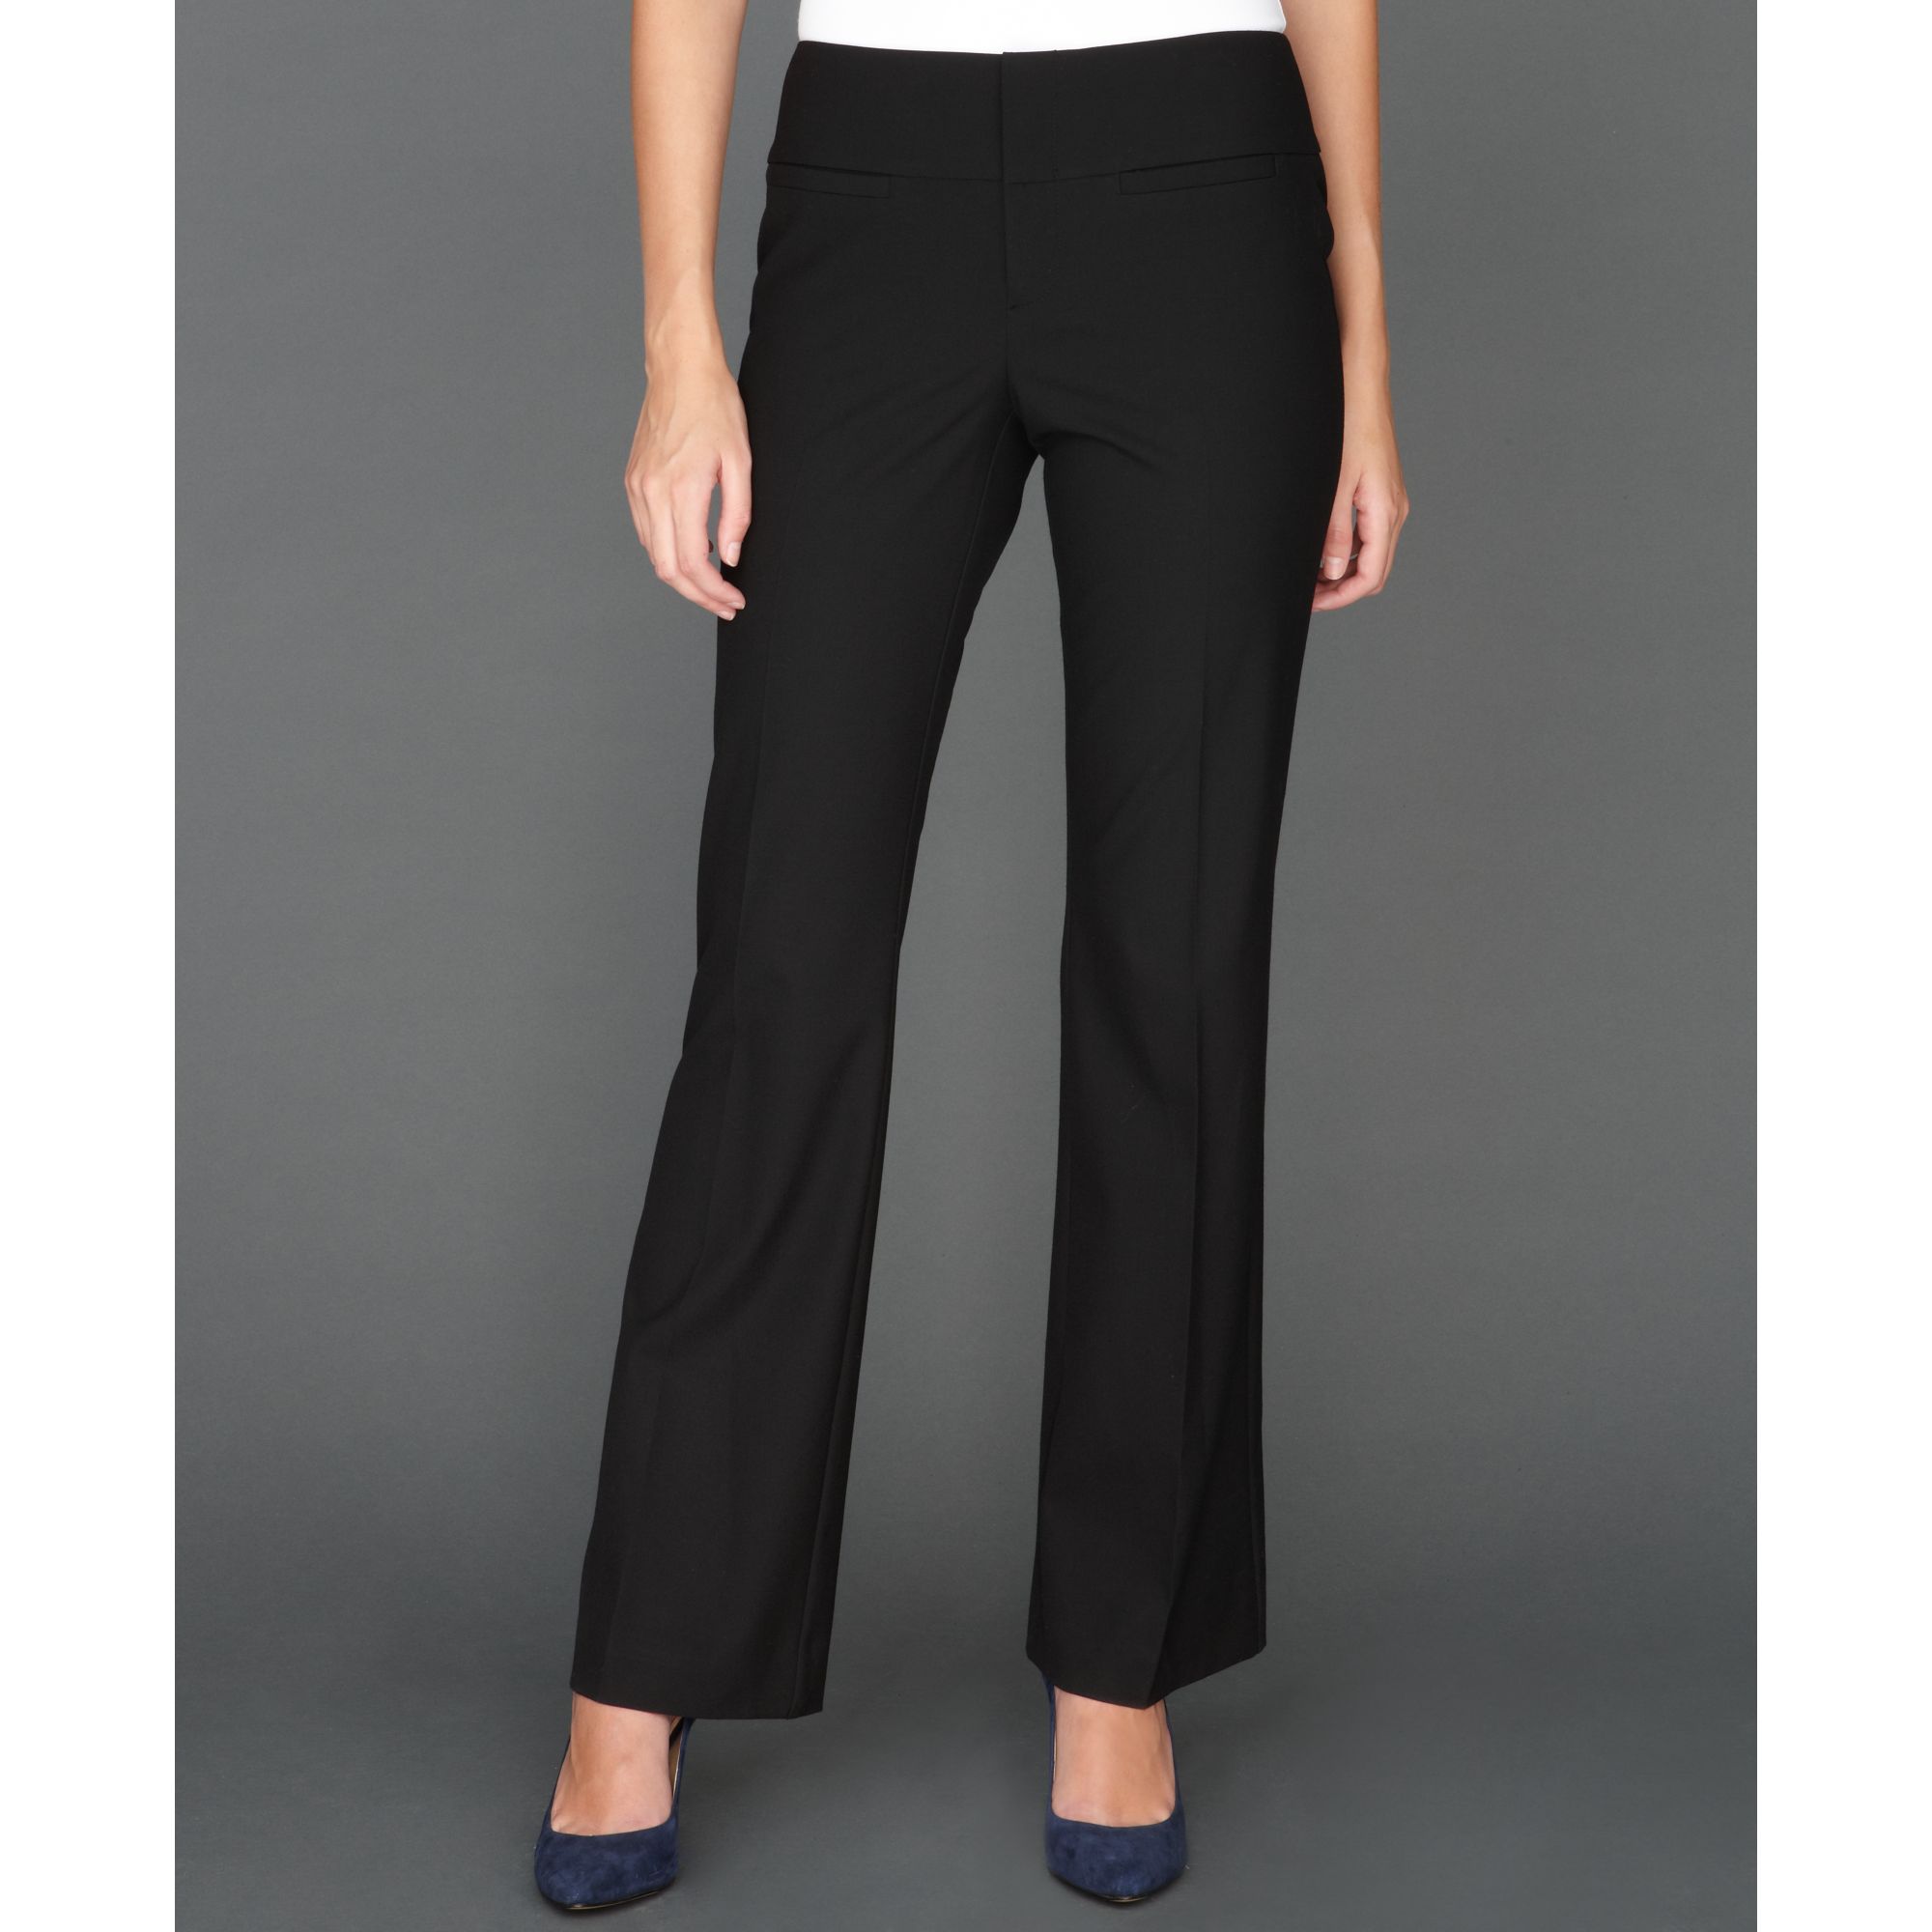 INC International Concepts Curvy fit Bootcut Trousers in Black | Lyst